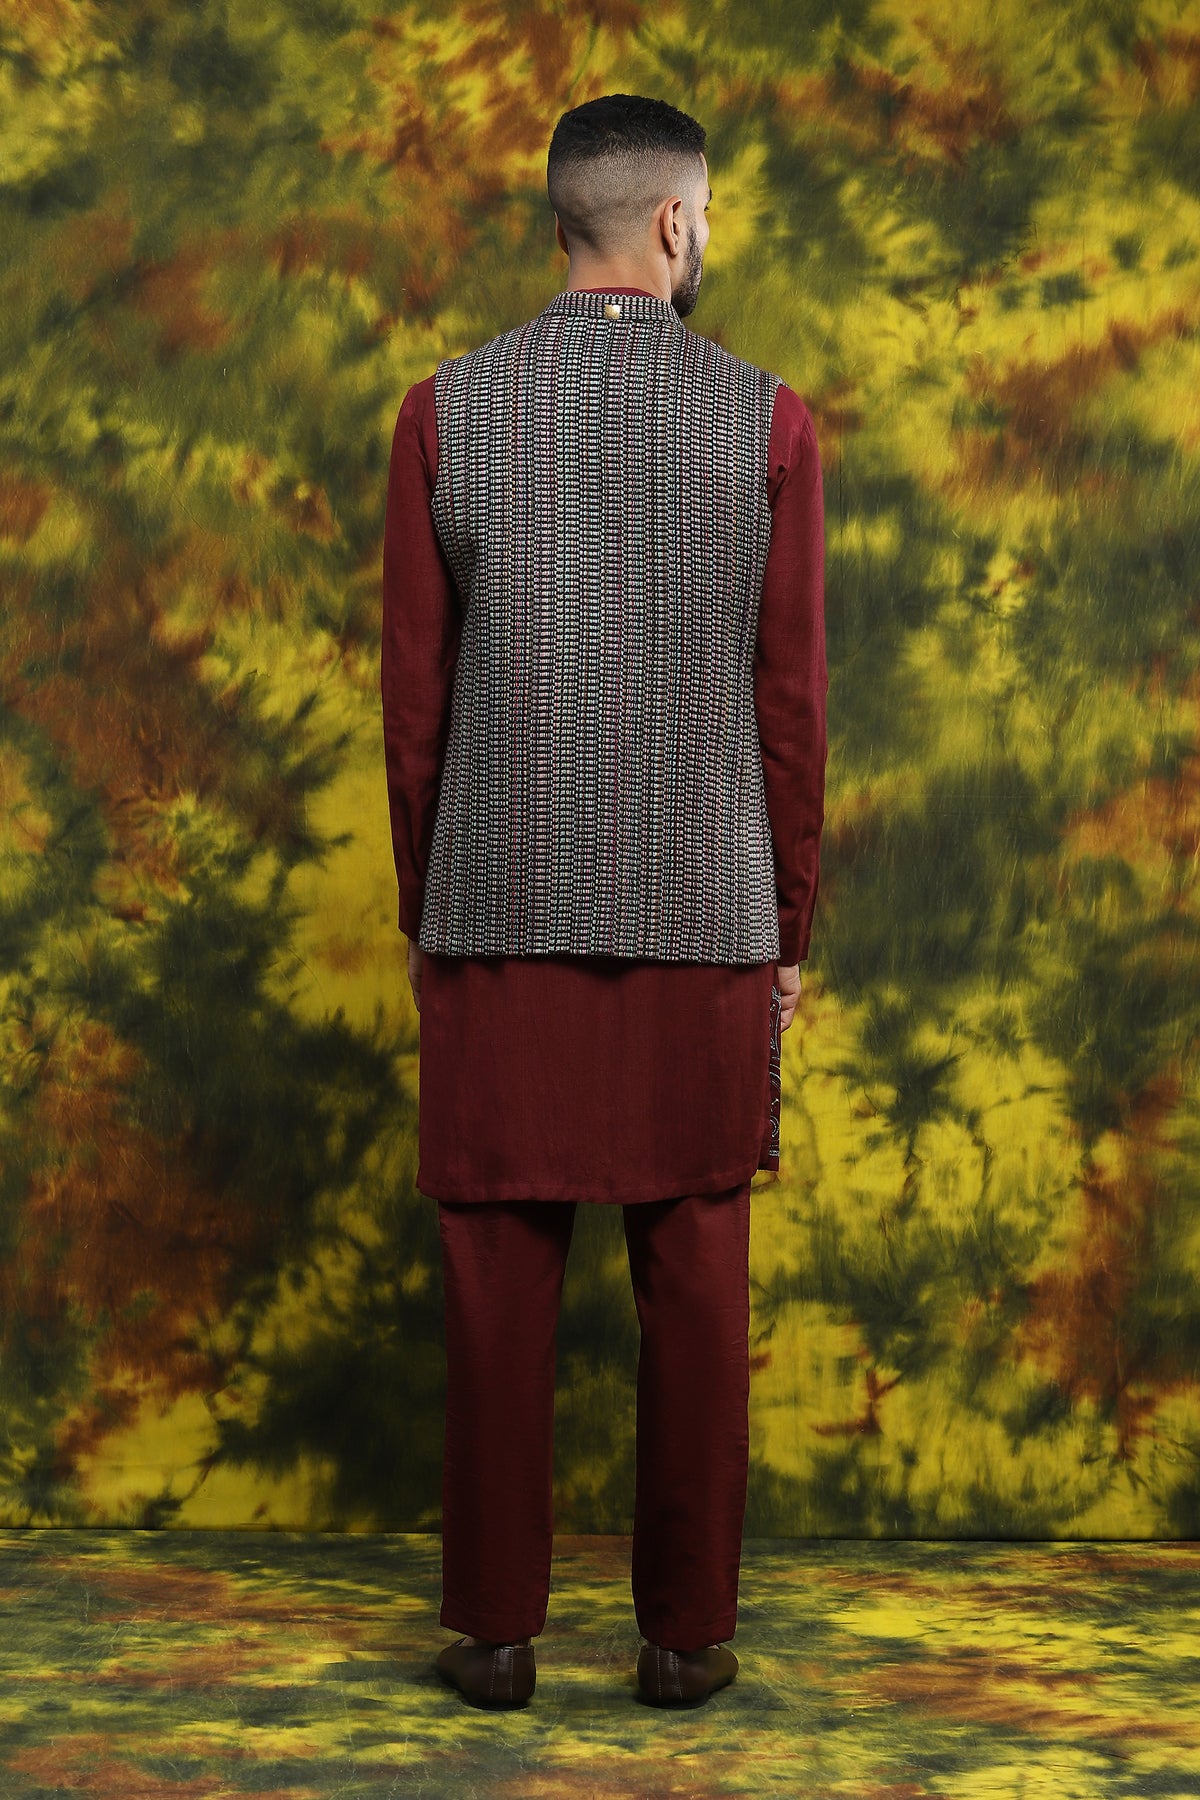 Multi Coloured Jacket In Jute Matched With Matching Kurta